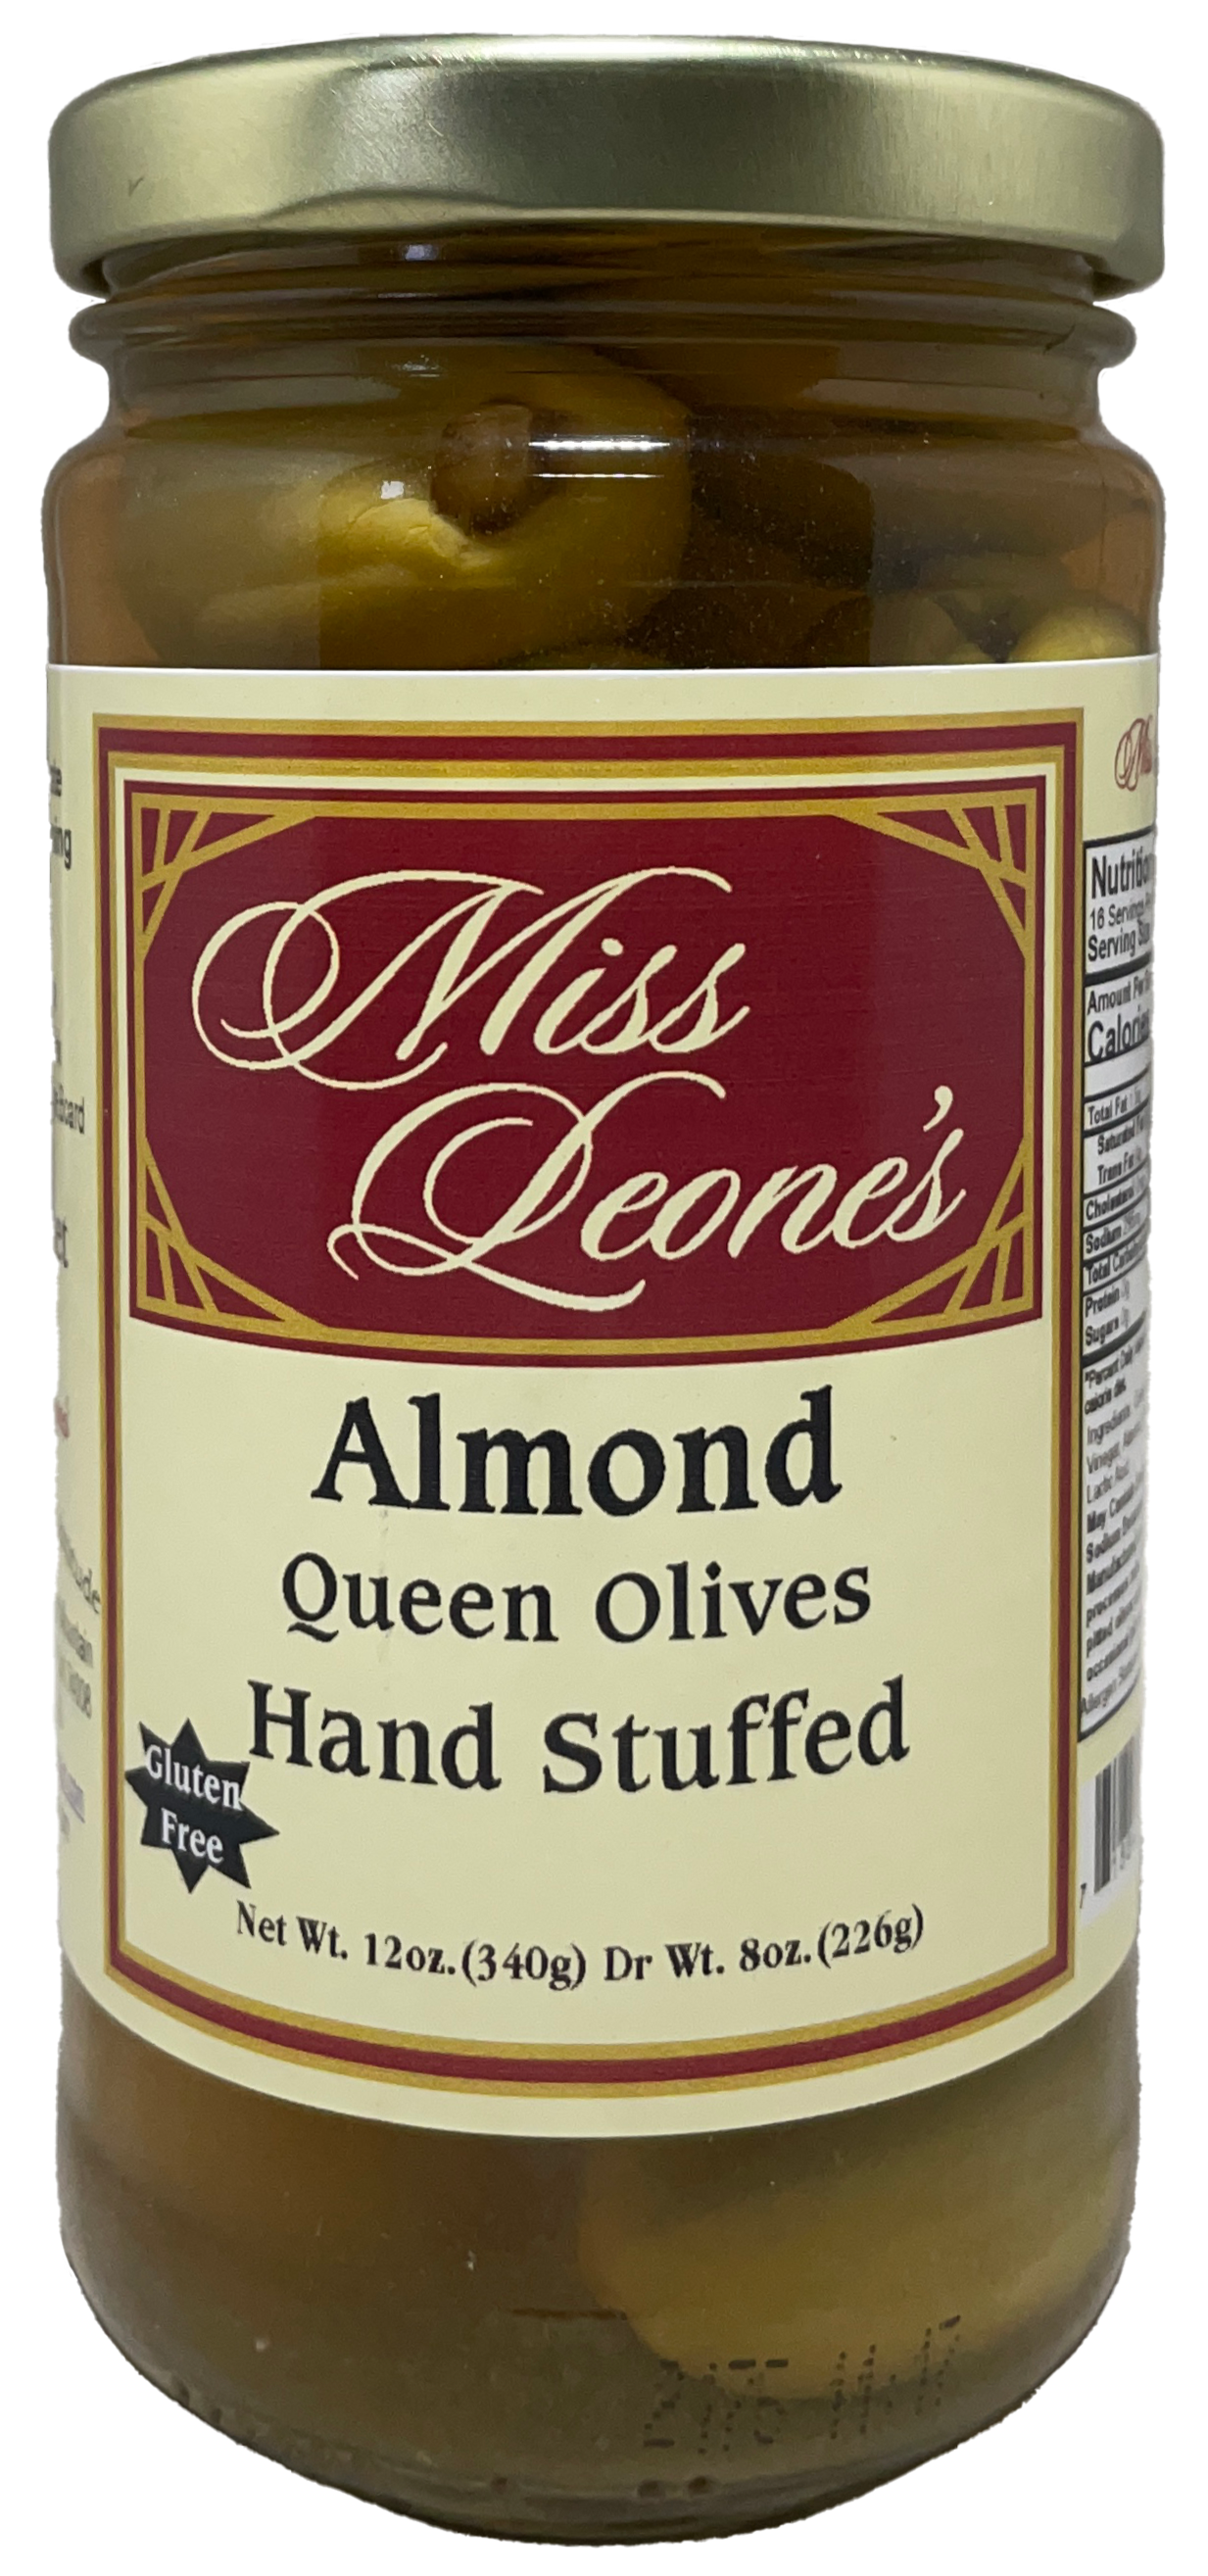 Almond Stuffed Queen Olives *NEW LOWER PRICE!*